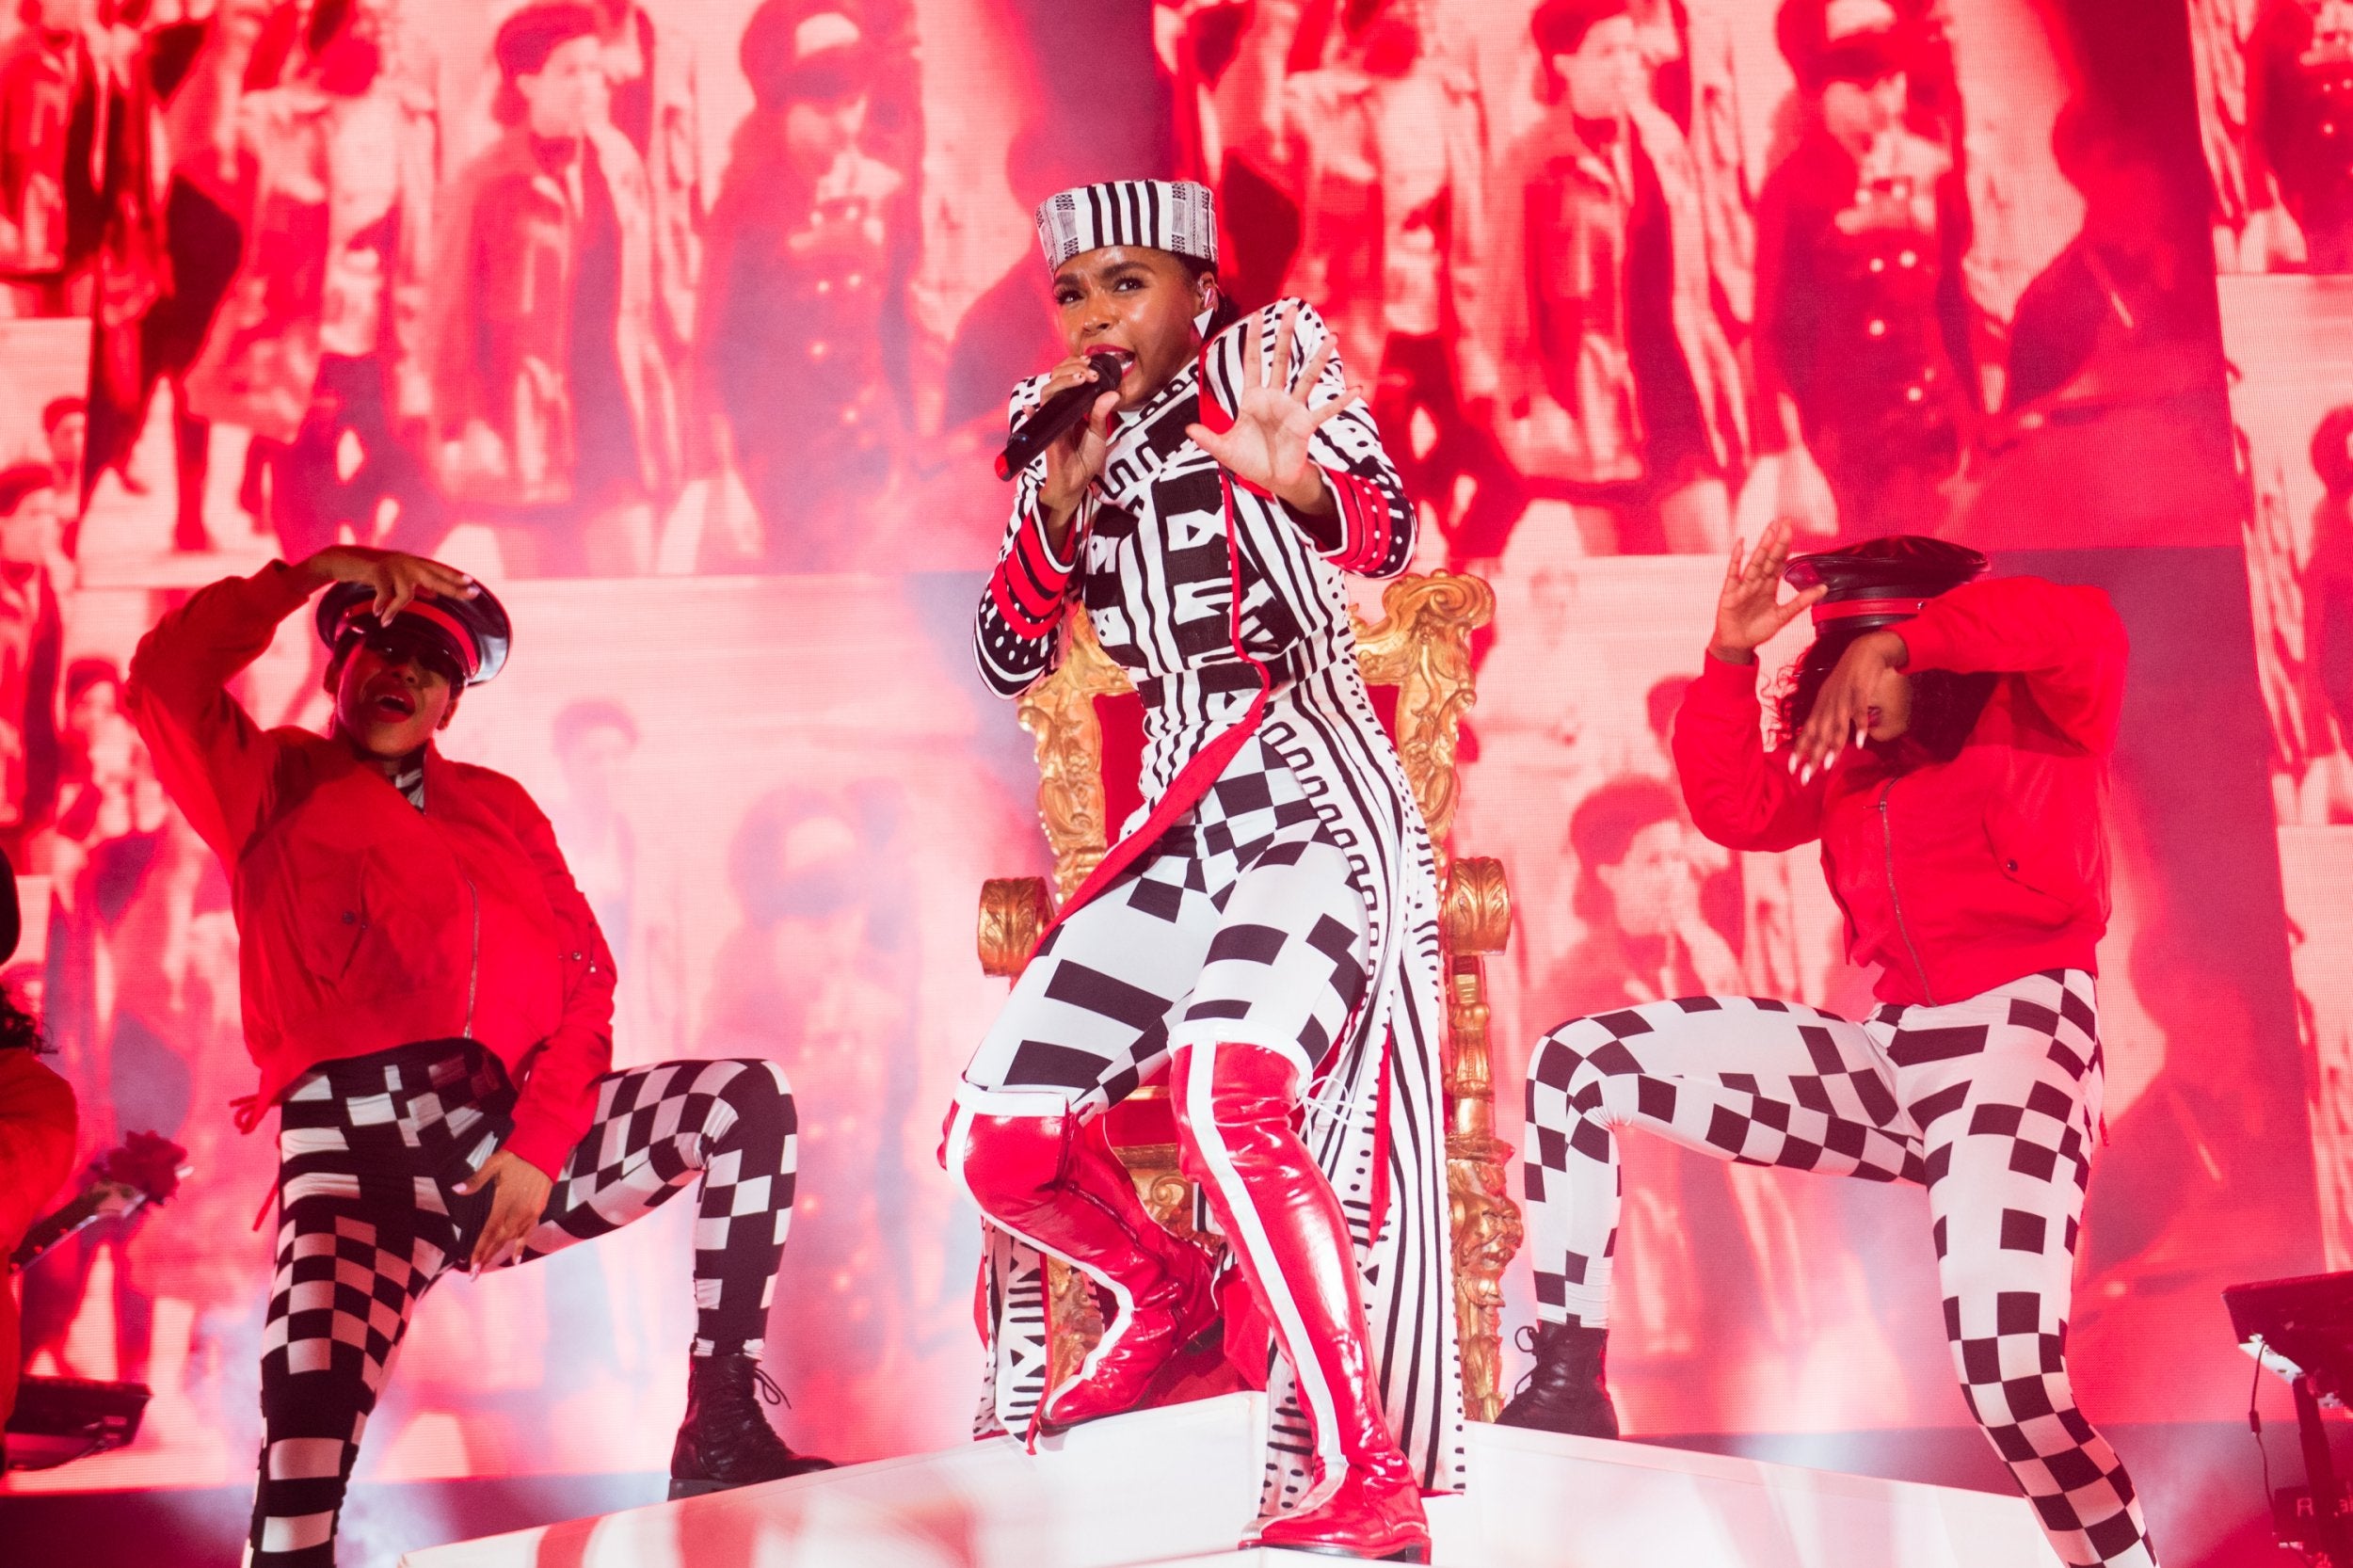 Janelle Monae performs at The Roundhouse in London